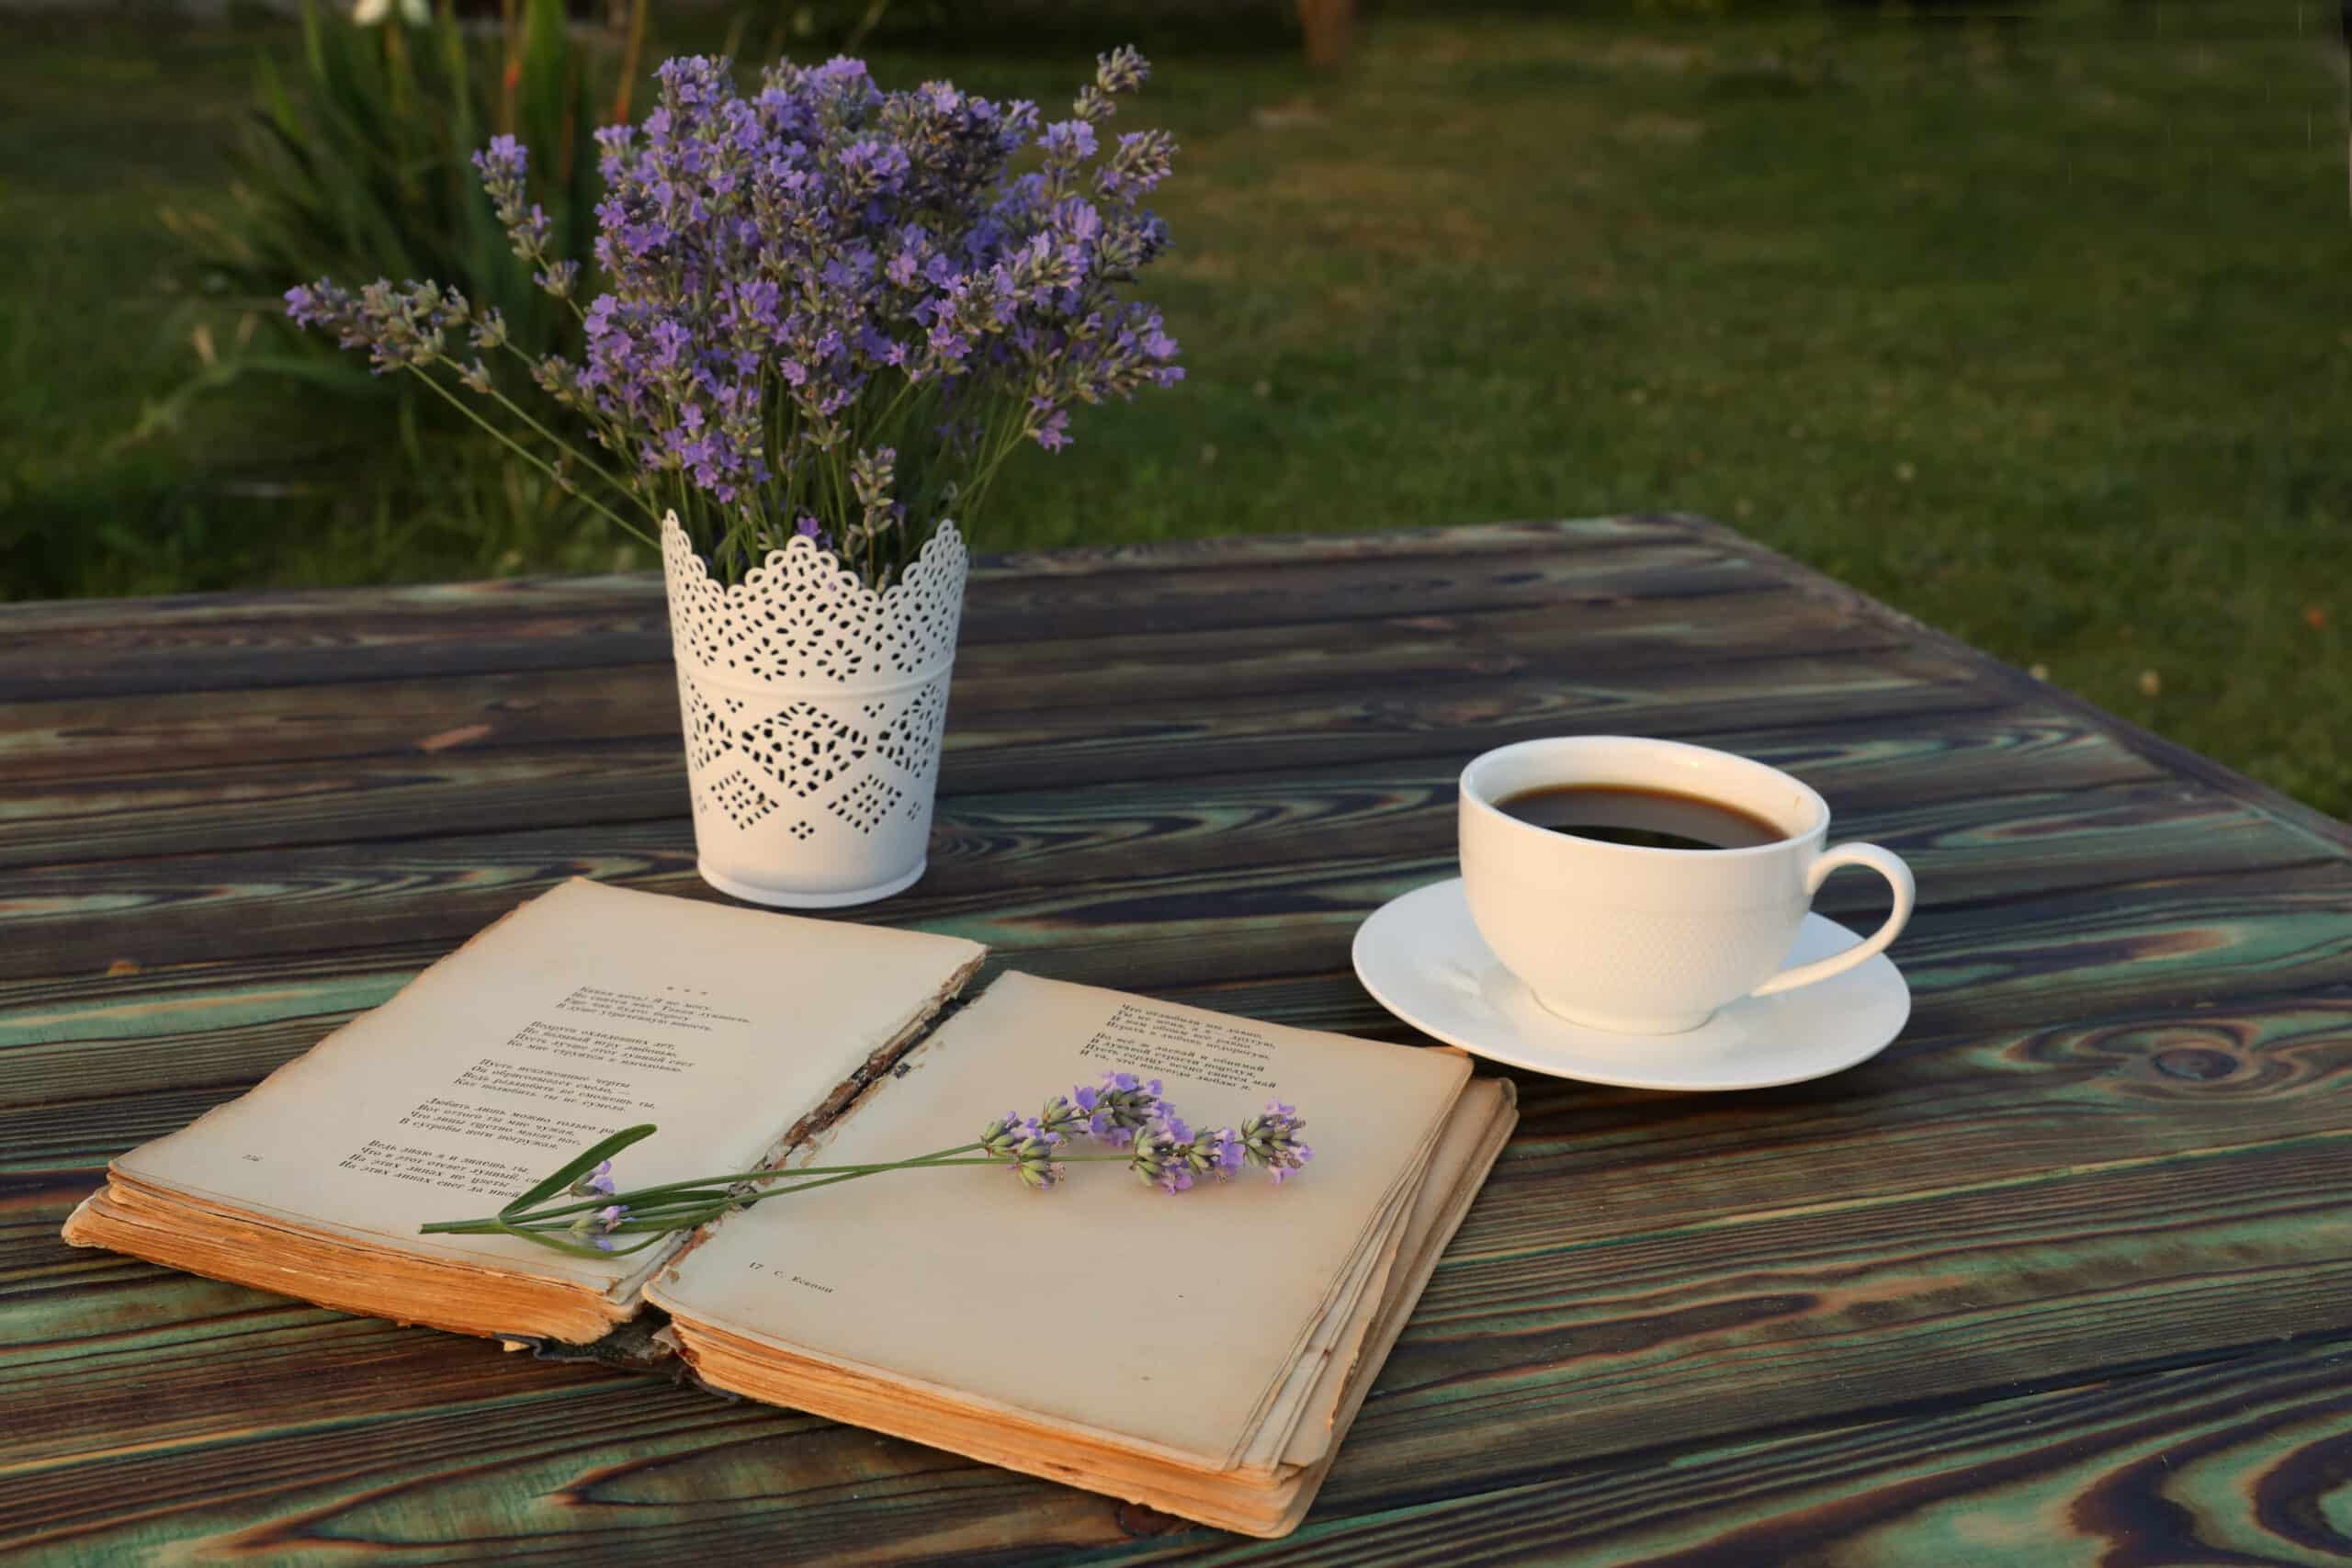 cup of coffee and poetry book on wooden table with lavender flowers